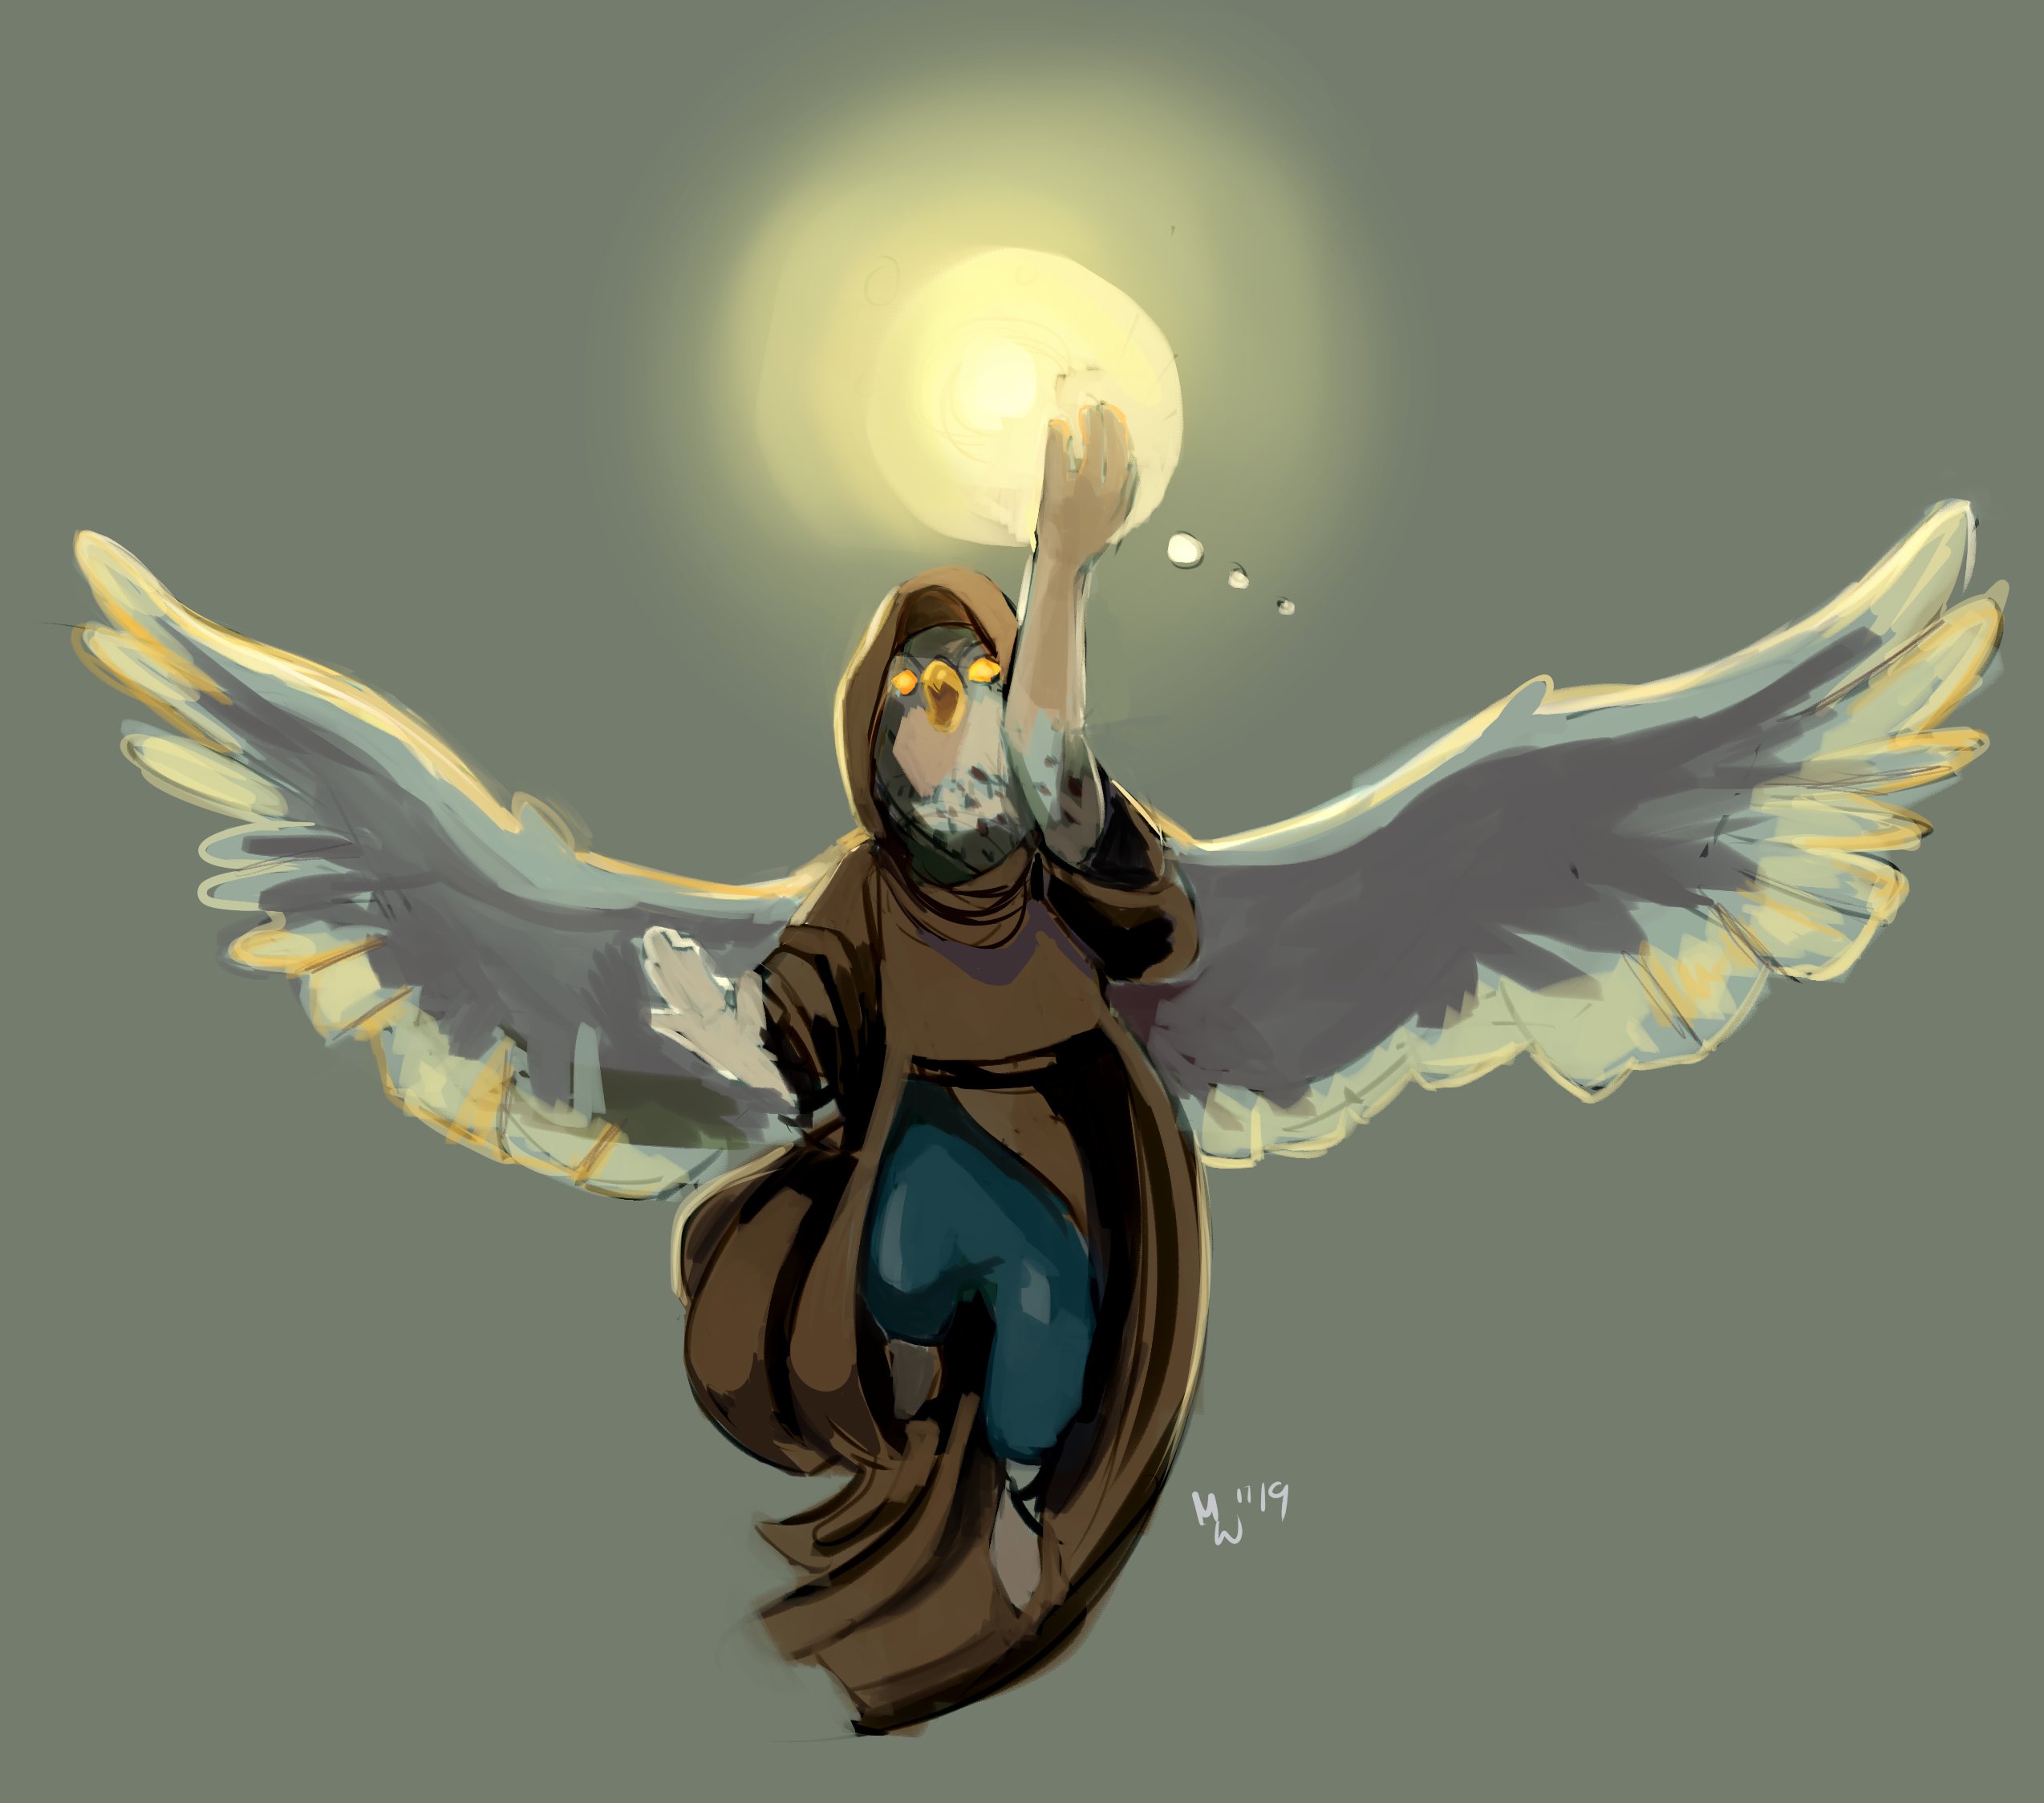 A female arrakocra cleric flies into the air holding a holy orb.